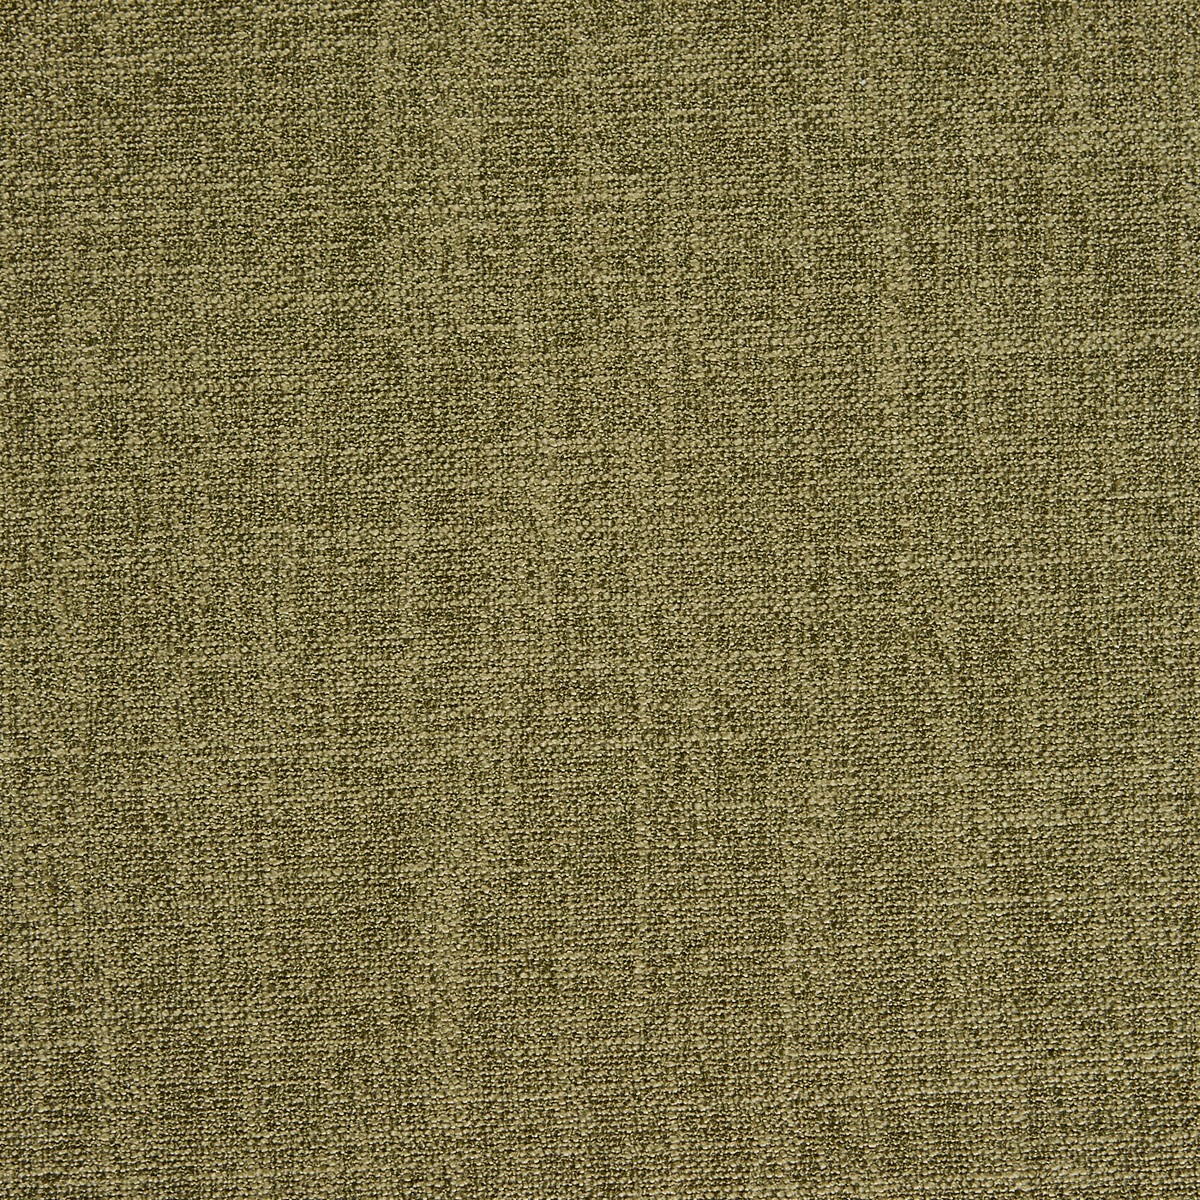 Whisp Olive Fabric by Prestigious Textiles